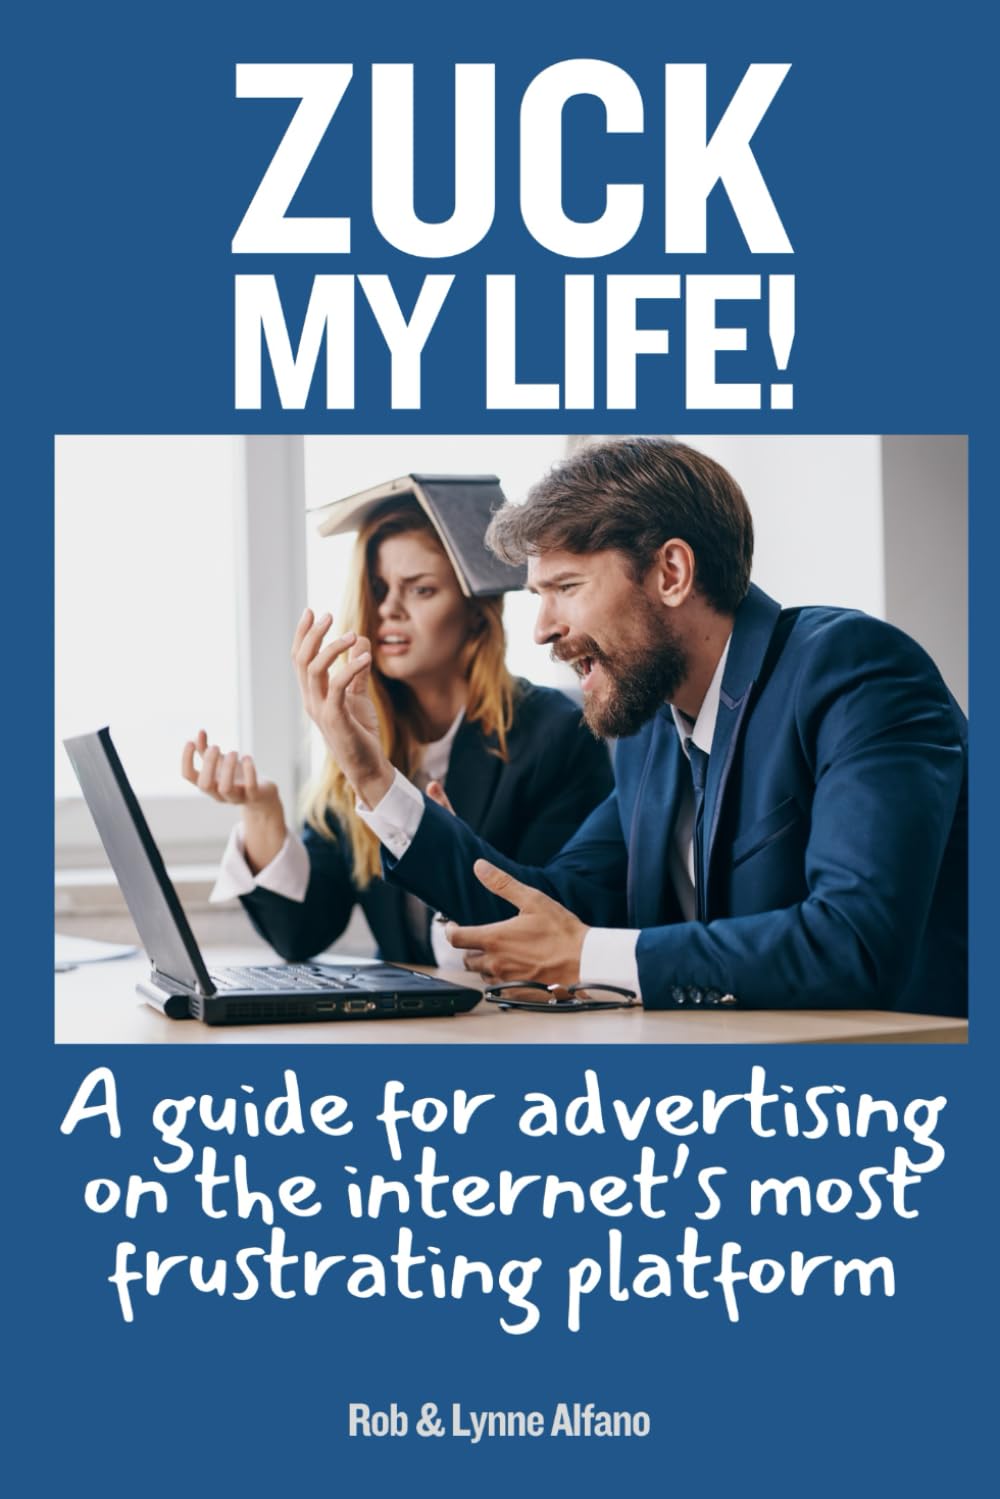 Zuck My Life: A Guide for Advertising on the Internet’s Most Frustrating Platform